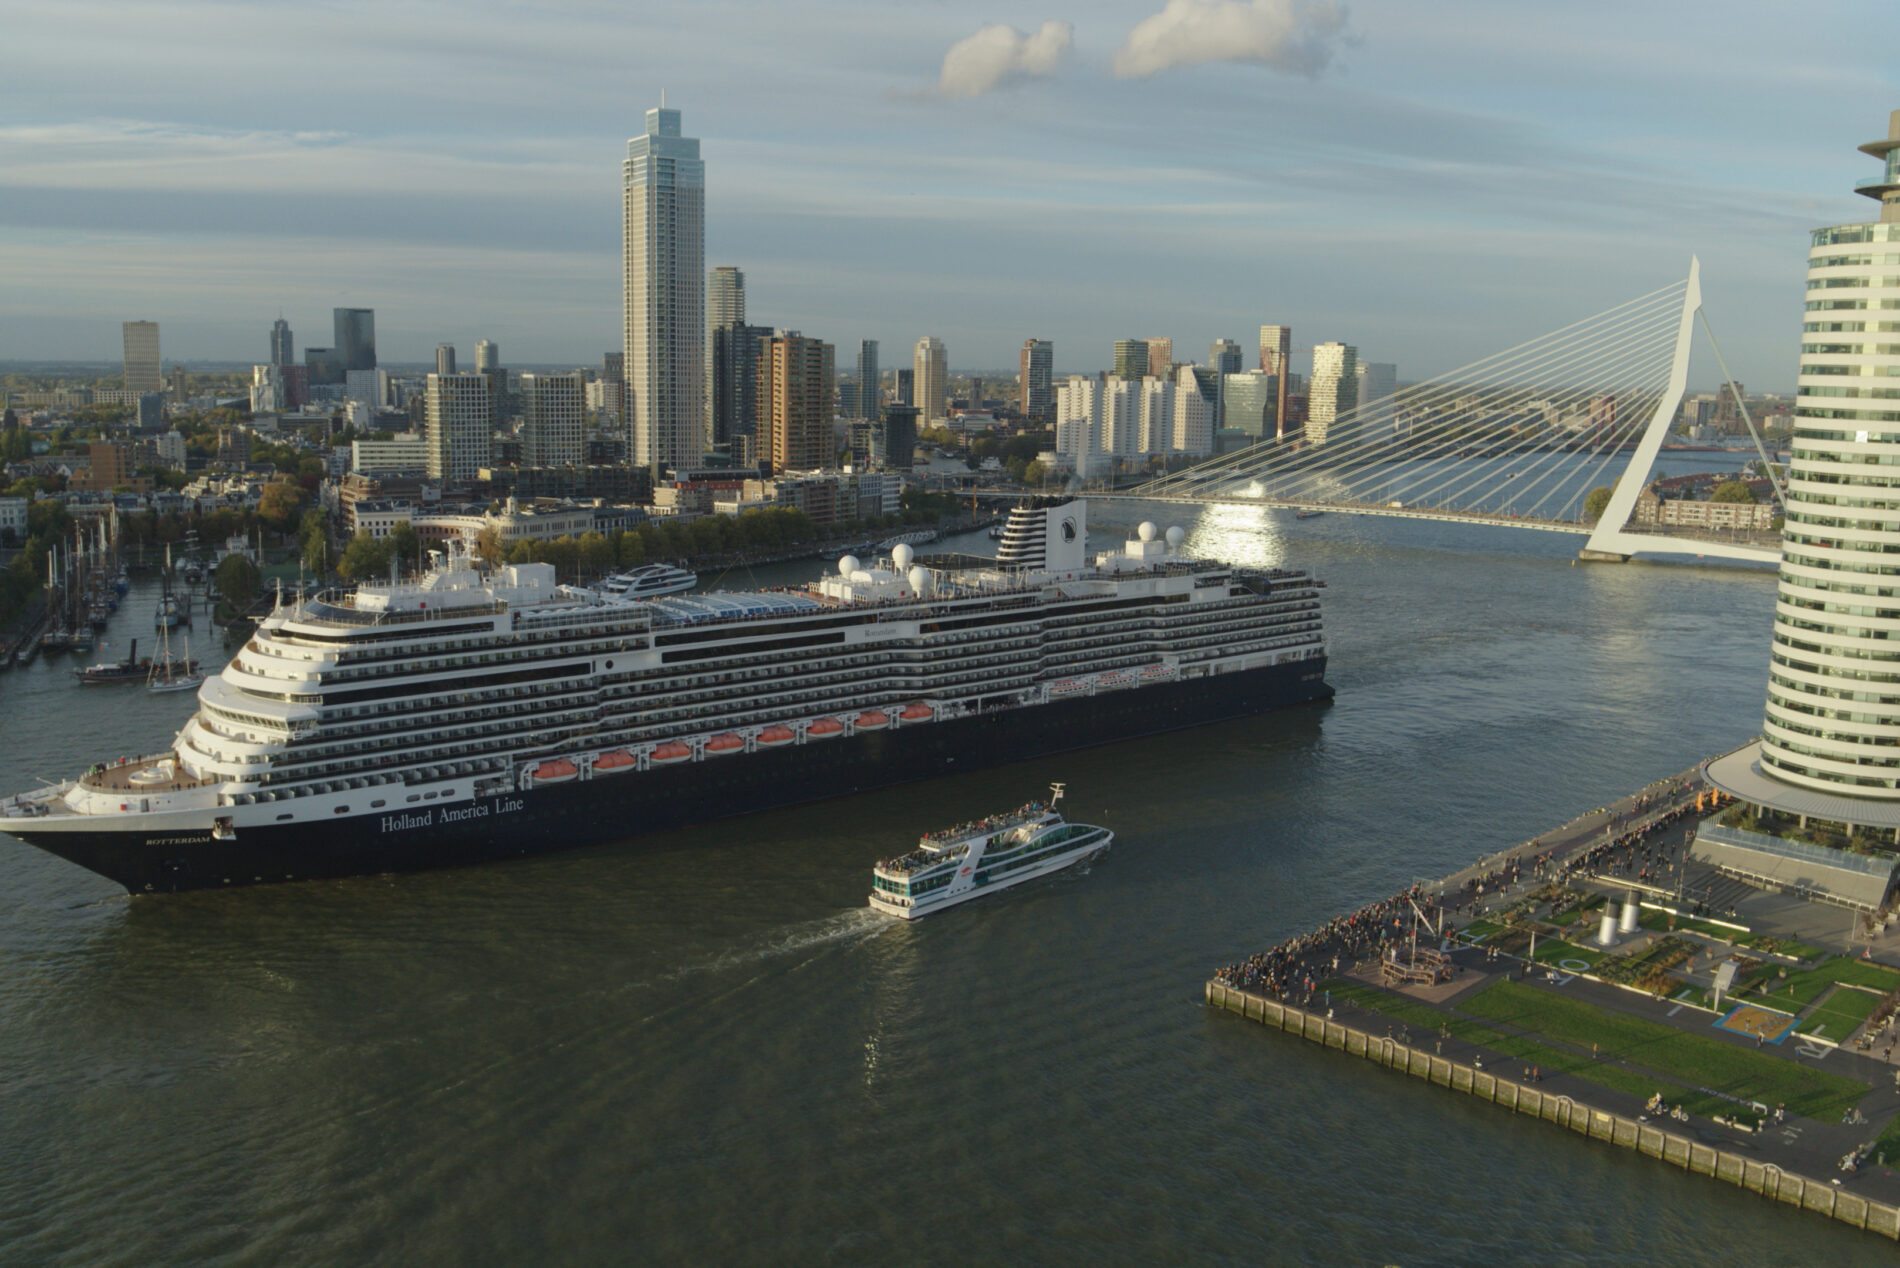 The cruise ship Rotterdam departs an urban port during daylight hours.